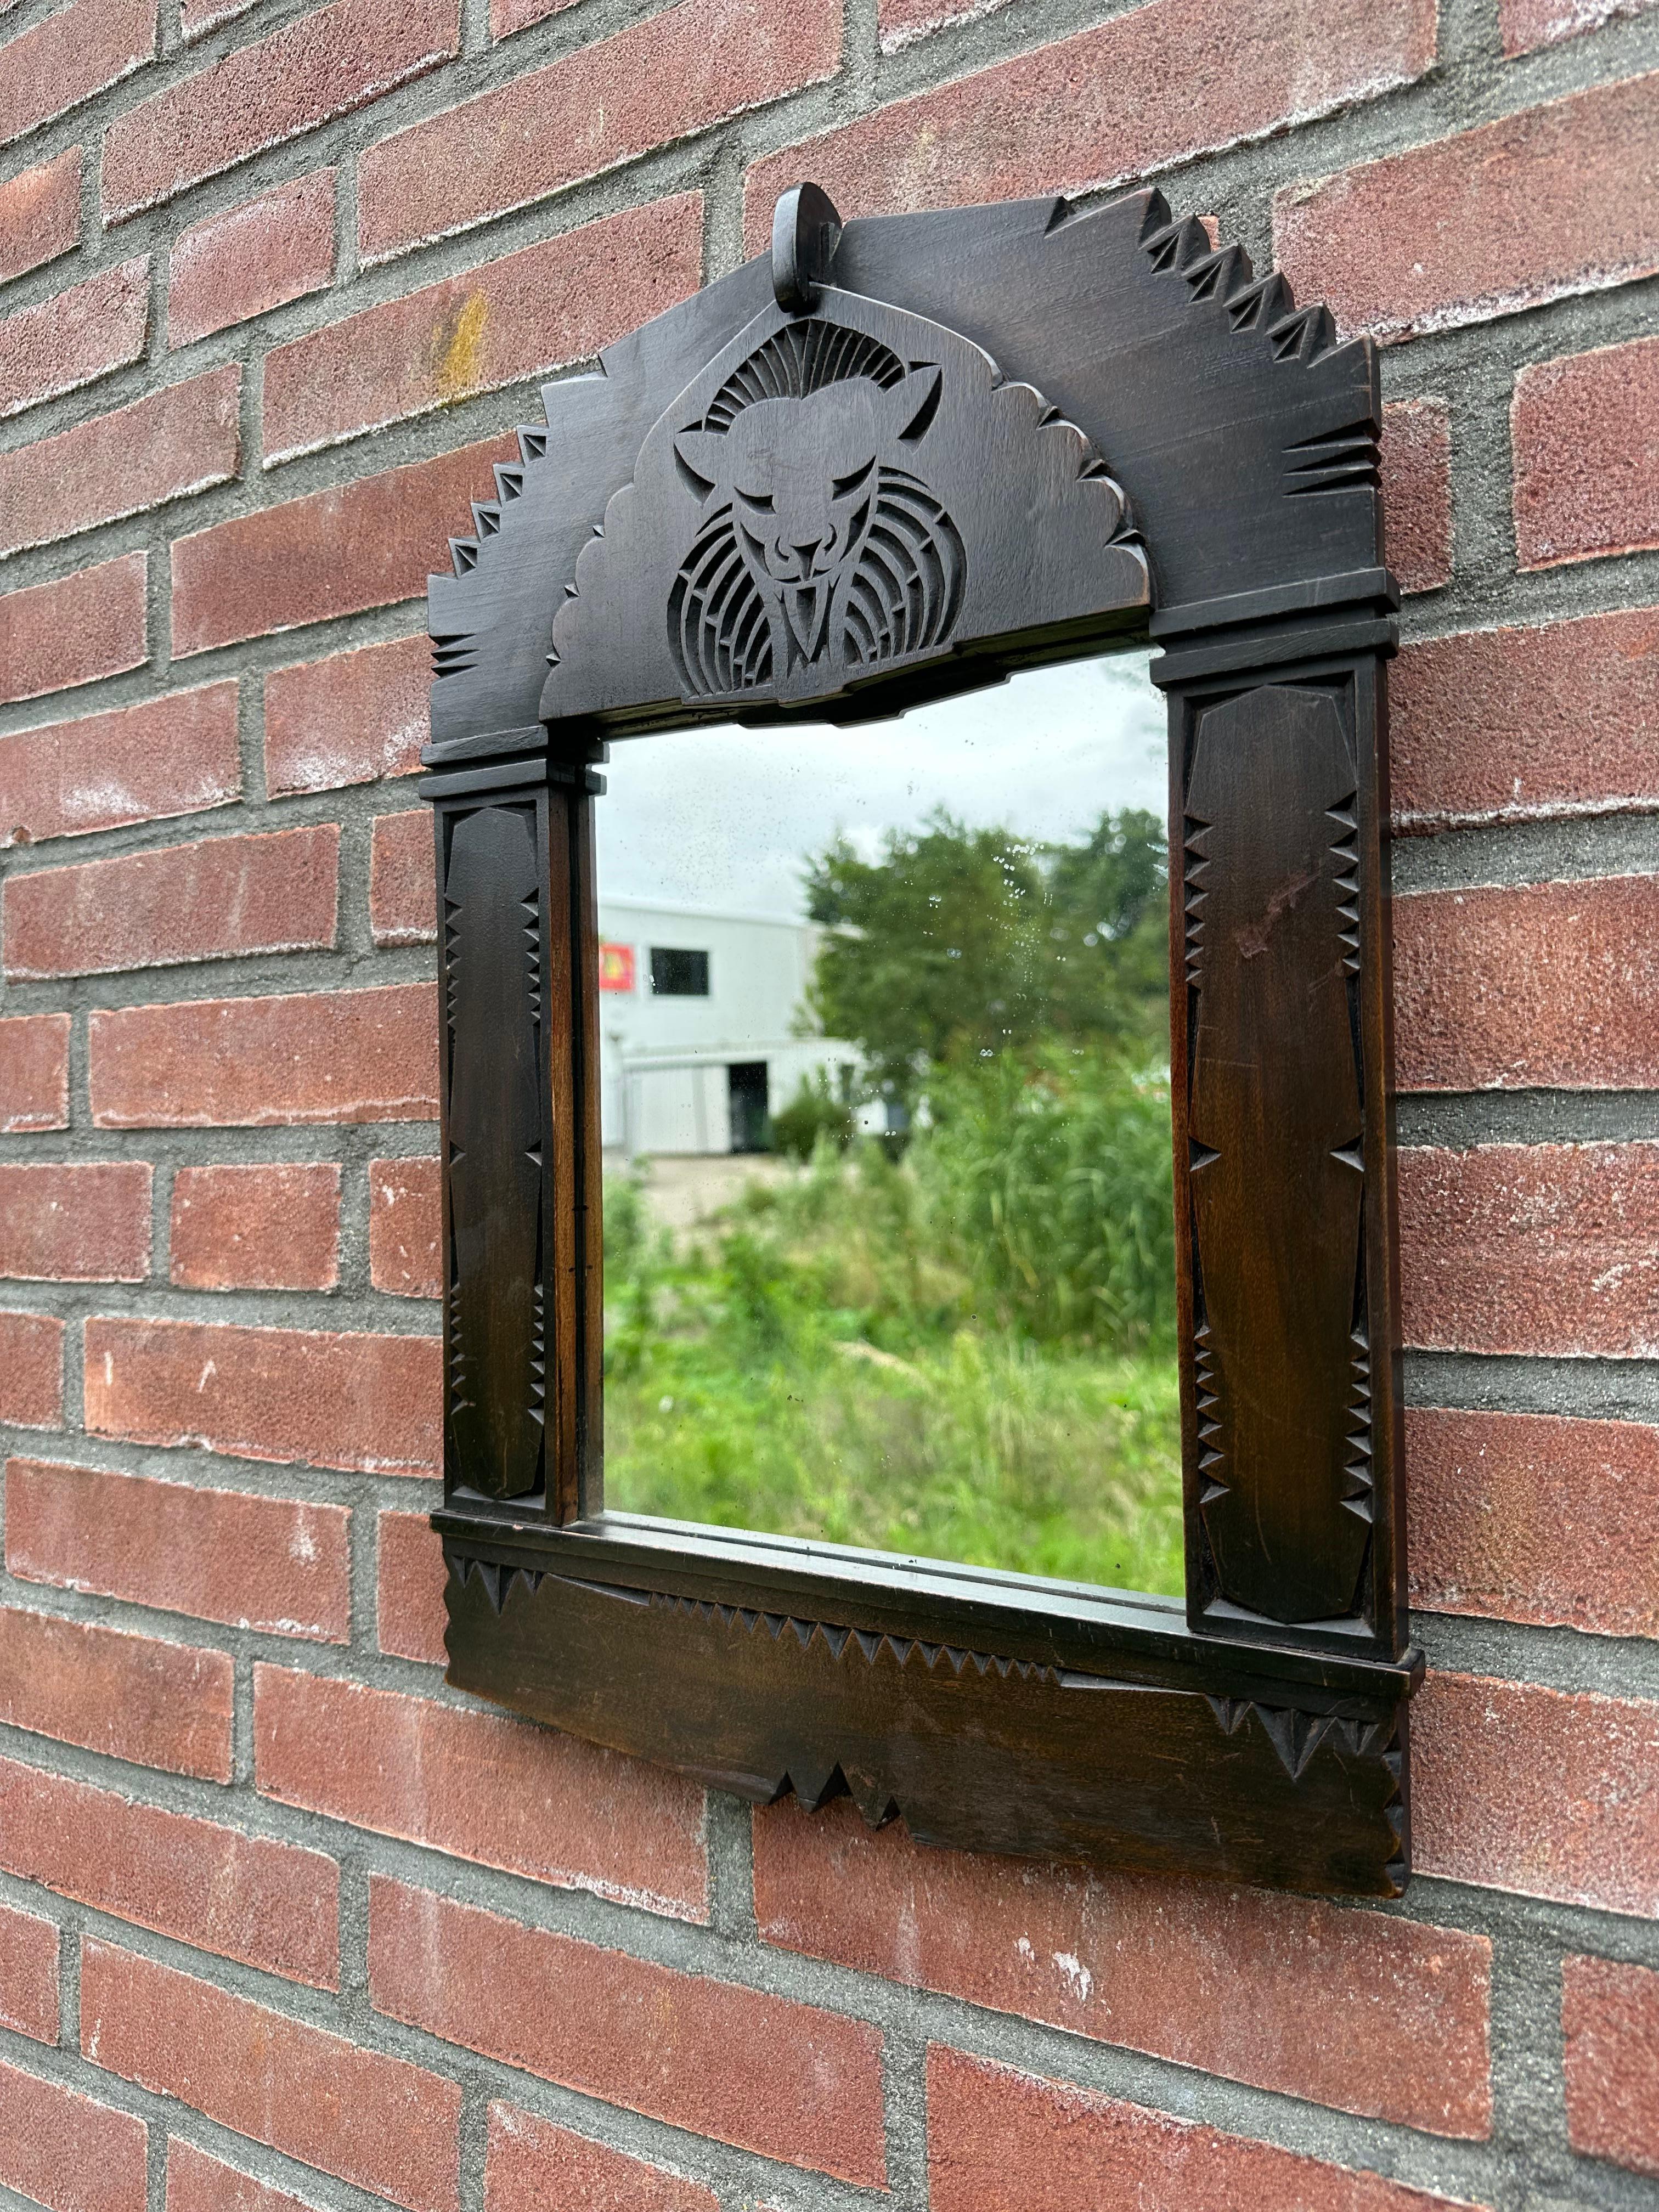 Striking, geometrical design wall mirror with handcarved lion / cat carving.

Via one of our trade contacts we recently purchased this perfectly hand carved sculptural wall mirror. This all handcarved wooden frame displays in the top a perfectly